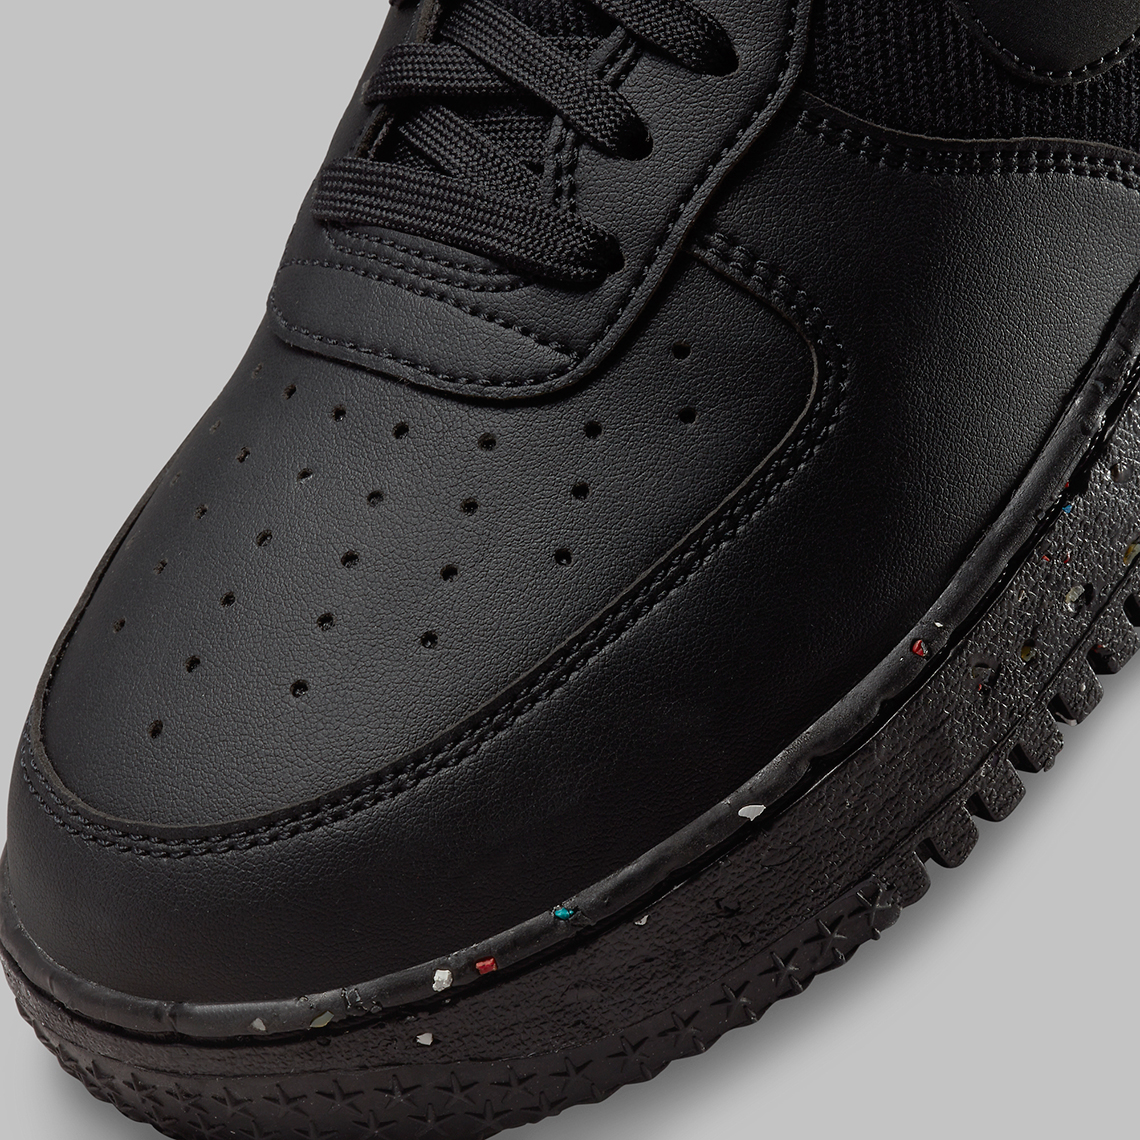 nike air force 1 crater black dh8083 001 release date 7